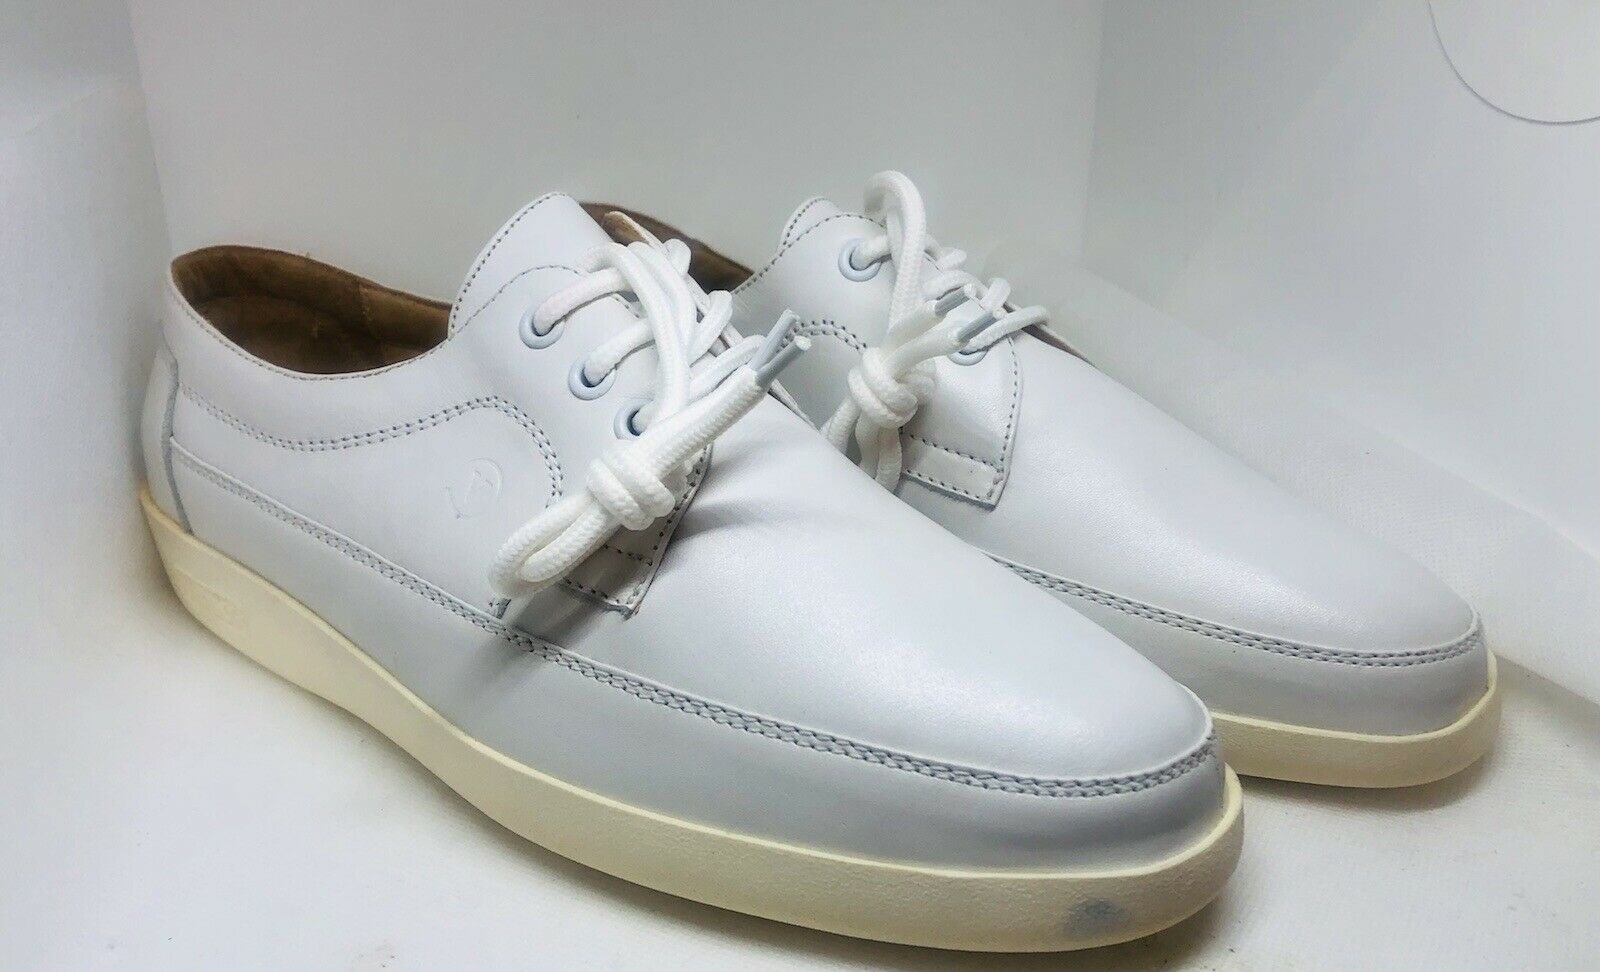 Vikings shoes mans leather oxford leathers 